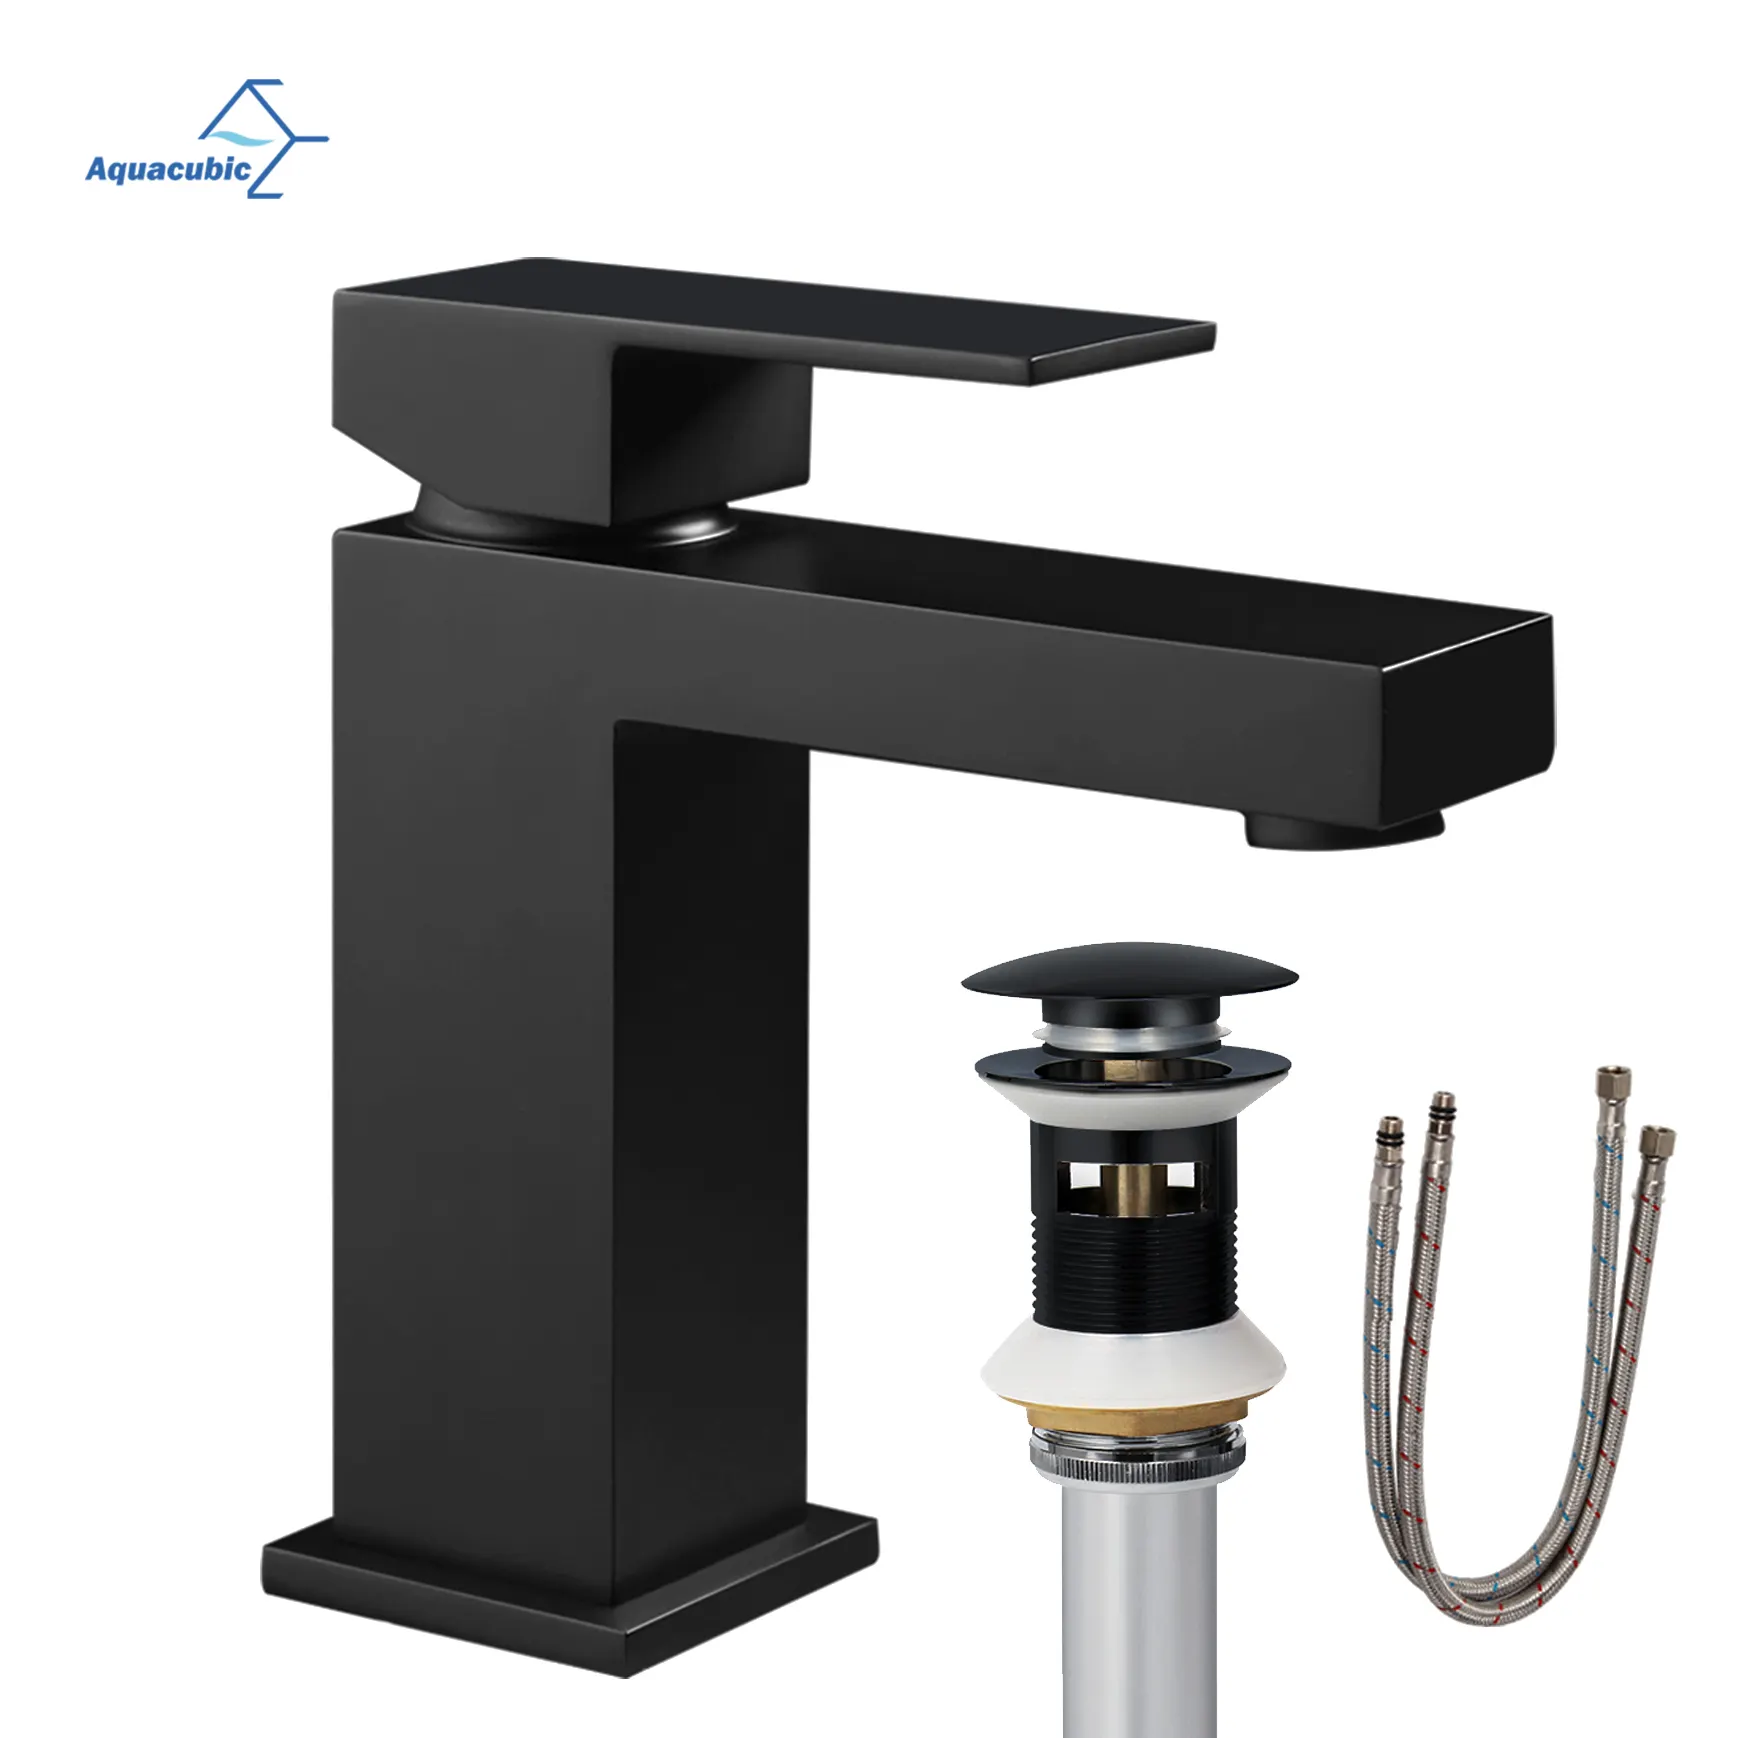 Luxury Designed Bathroom Single Hole CUPC Brass Lavatory Black Basin Faucet Shipping from the United States